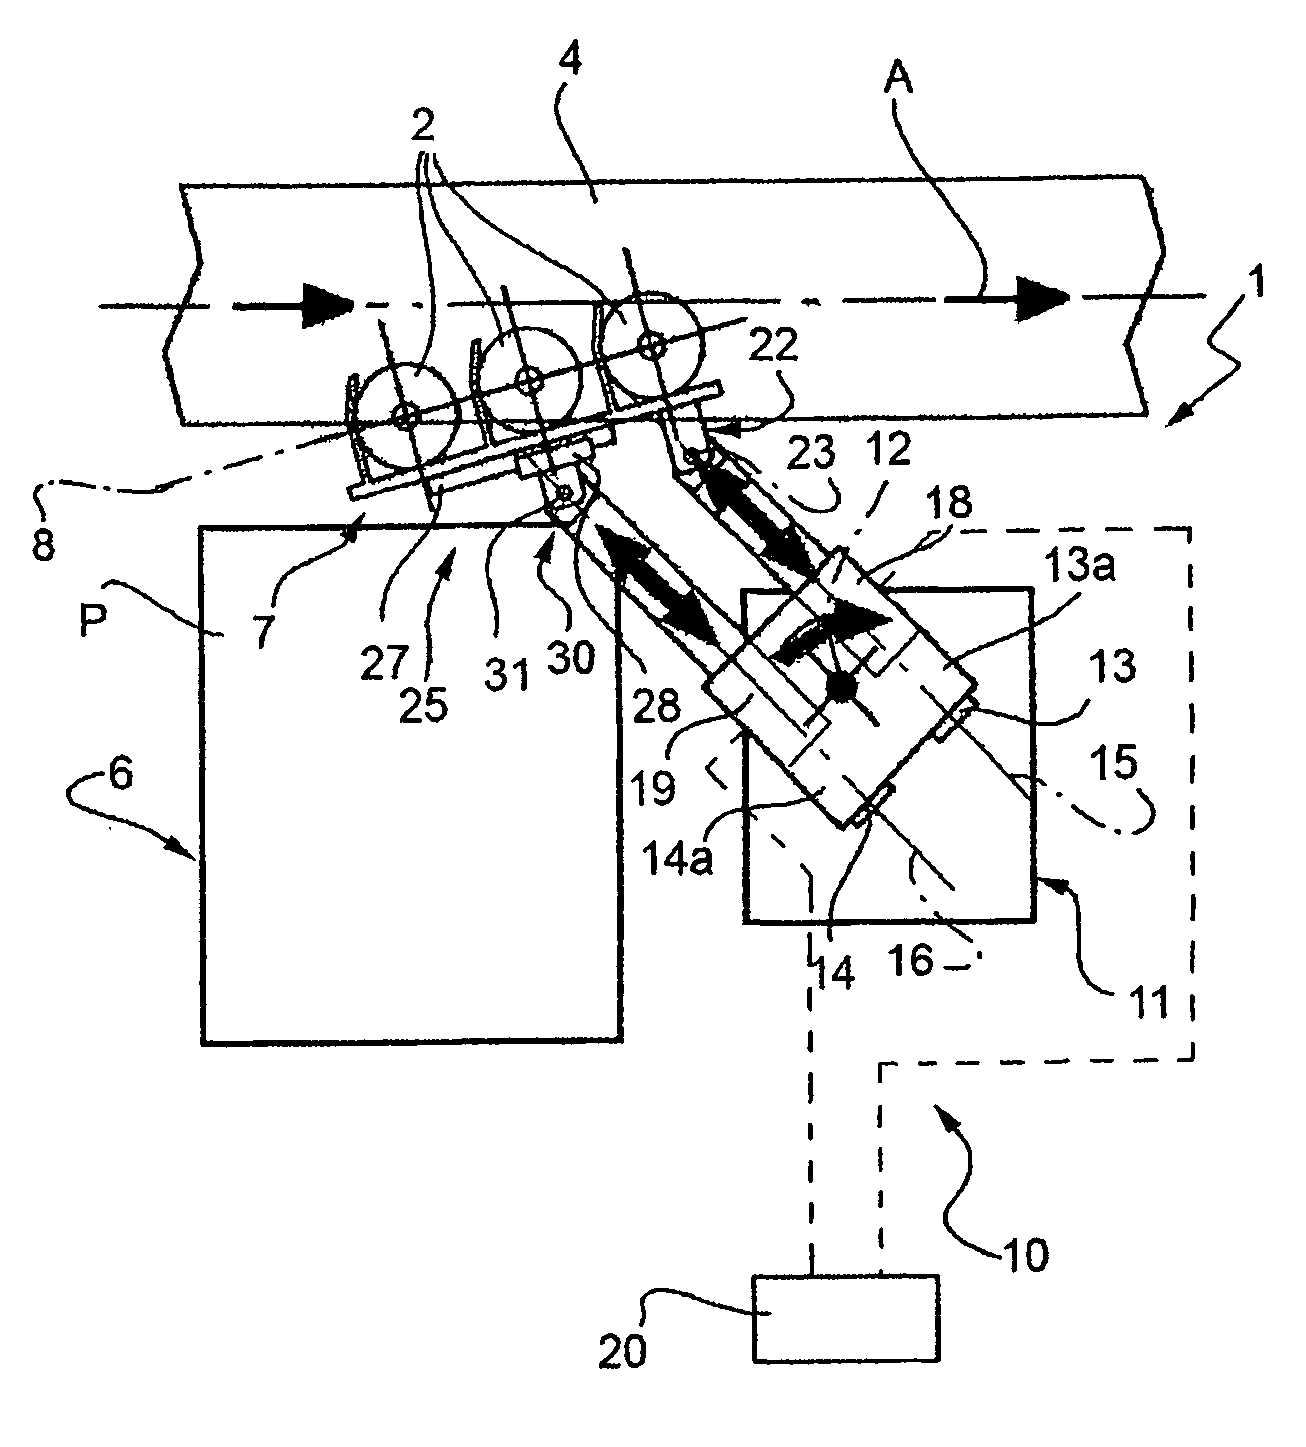 Transfer assembly for transferring glass articles